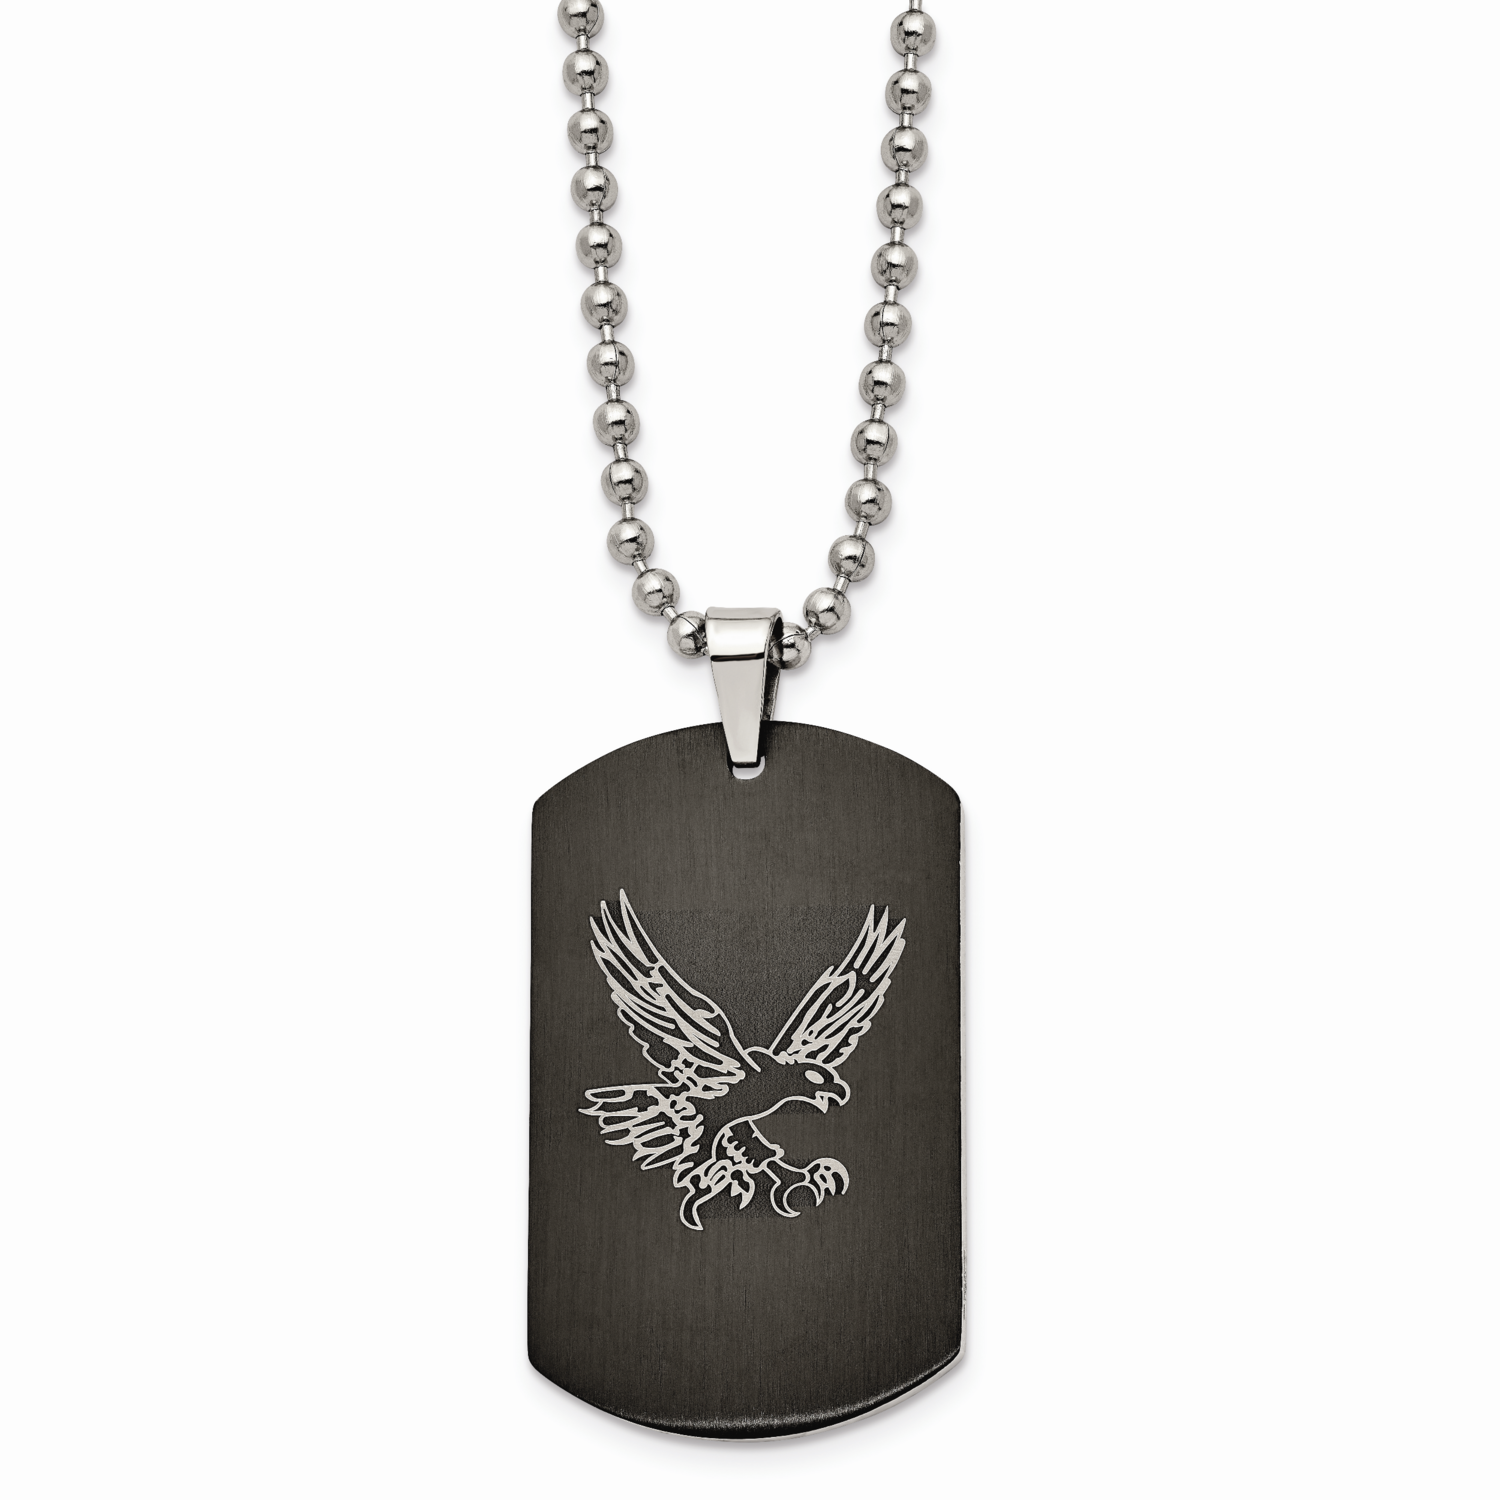 Eagle Dog Tag Black IP-plated CZ Stone Stone Polished Necklace Stainless Steel SRN1357-22